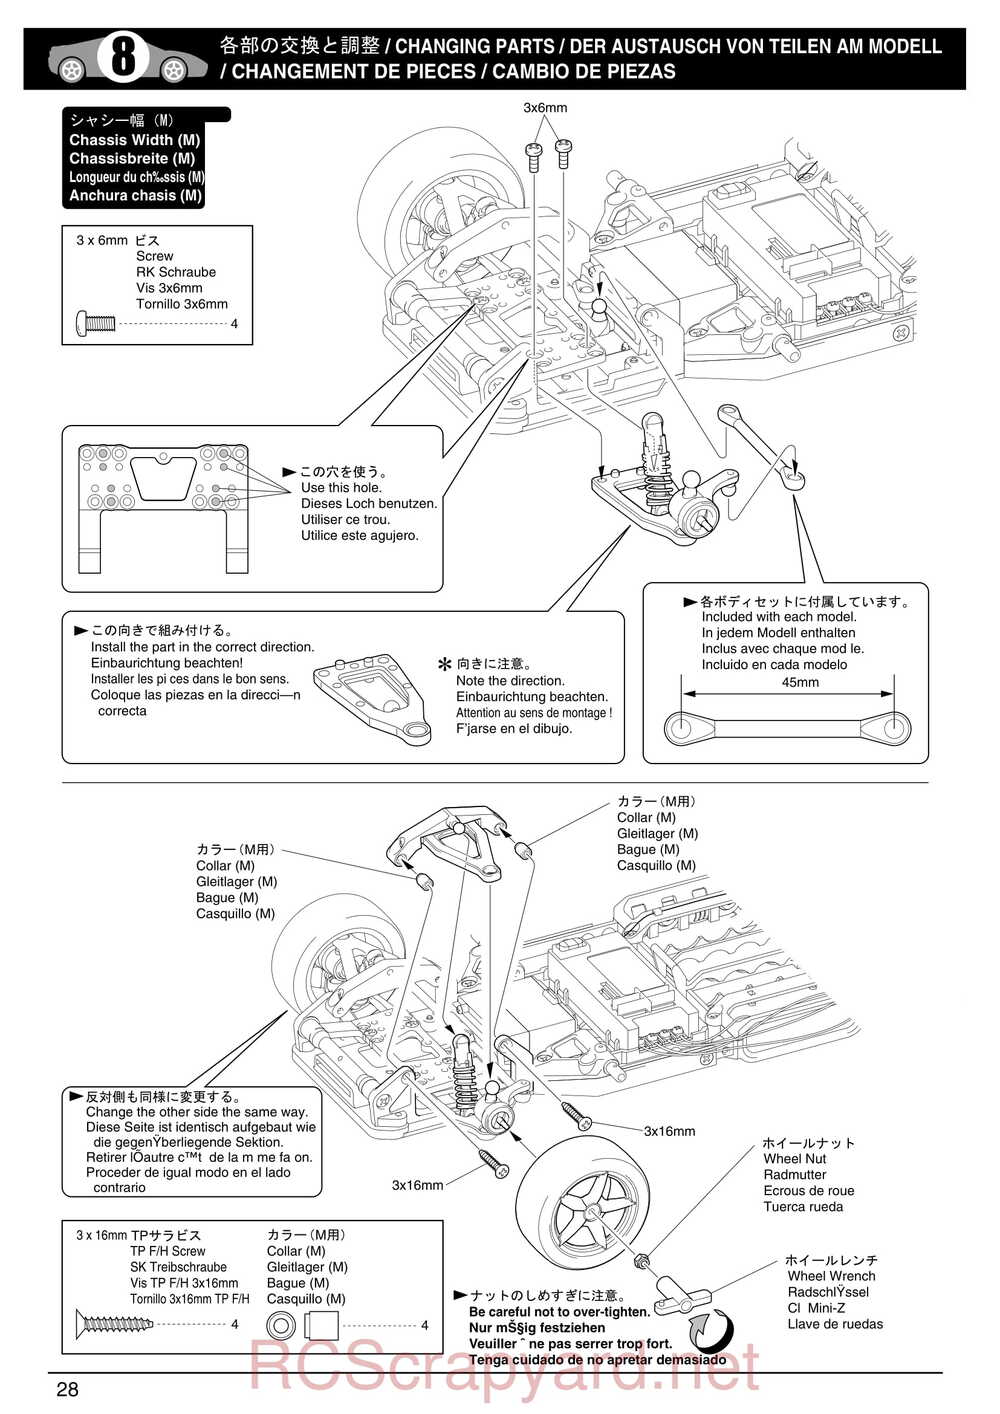 Kyosho - 30551 - a12 Sport - Manual - Page 28